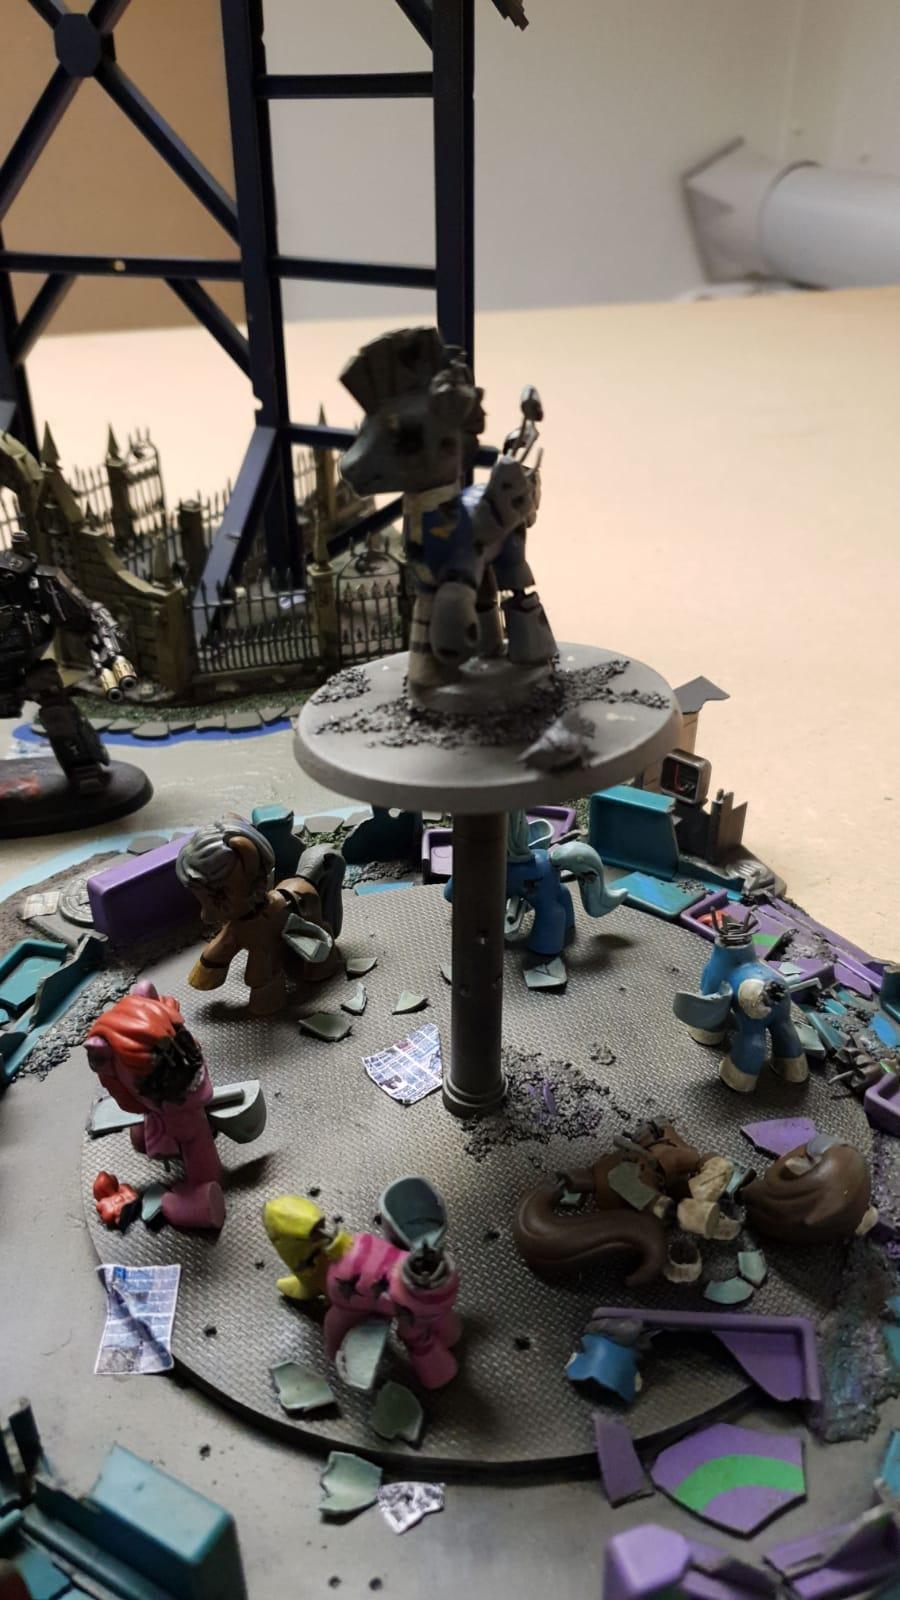 2018, Advertisment, Amusement, Armies, Billboard, Collum, Damaged, Deathwatch, Go, Inquisition, Little, Merry, Museum, My, Parade, Park, Pony, Rebarb, Rollercoaster, Round, Ruined, Shipwreck, Space, Space Marines, Statue, Warhammer 40,000, Warhammer Fantasy, Wrecked